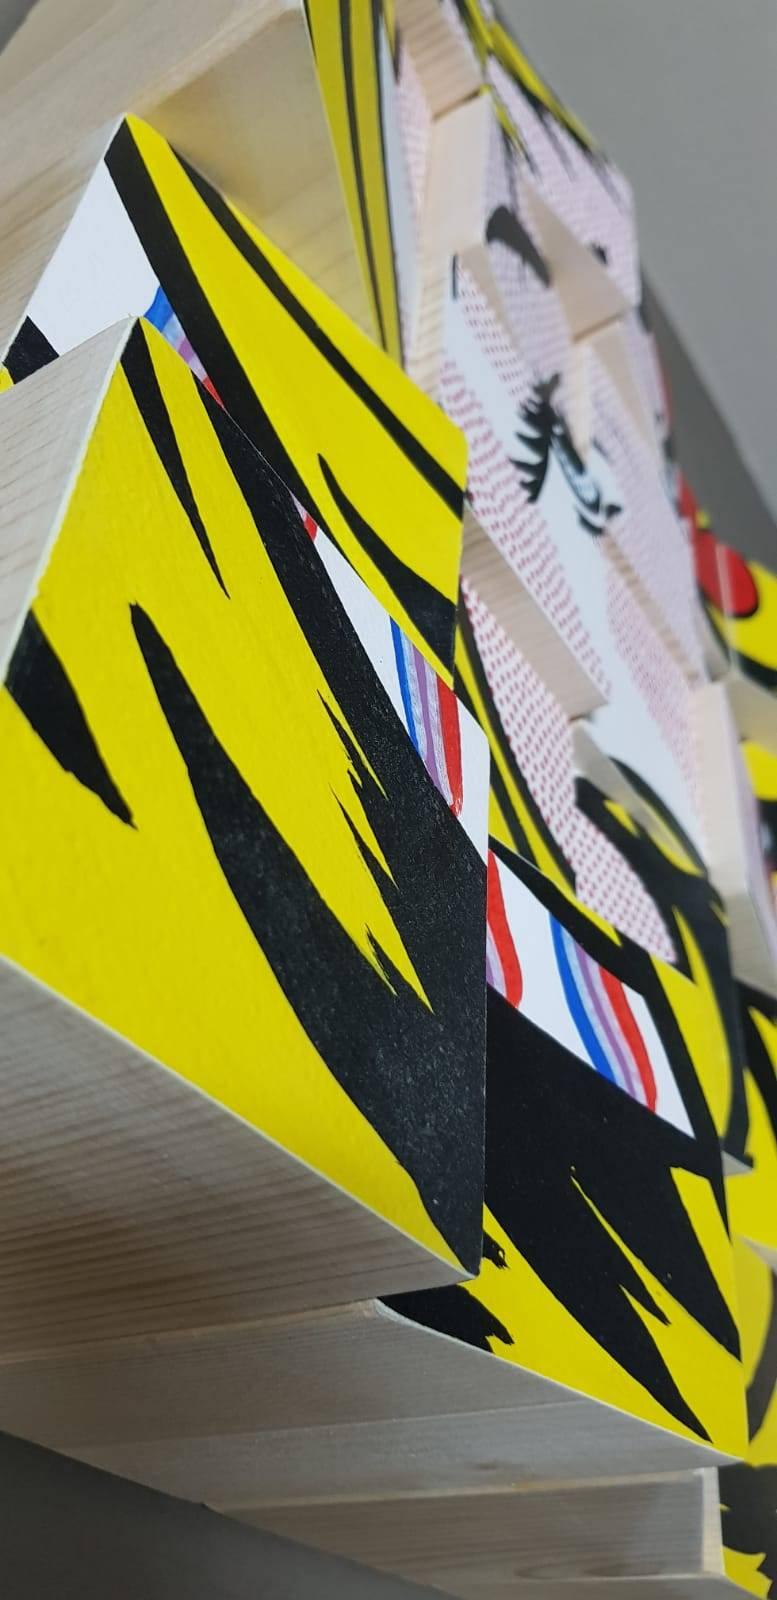 My Girl is a tribute to Roy Lichtenstein Acrylic Paint on Cotton Paper on Wooden Blocks

This is a Conceptual Contemporary art piece, Lichtenstein and Pop Art inspired made out of Wooden Blocks, Acrylic Paint on Cotton Paper. Girl with blonde yellow